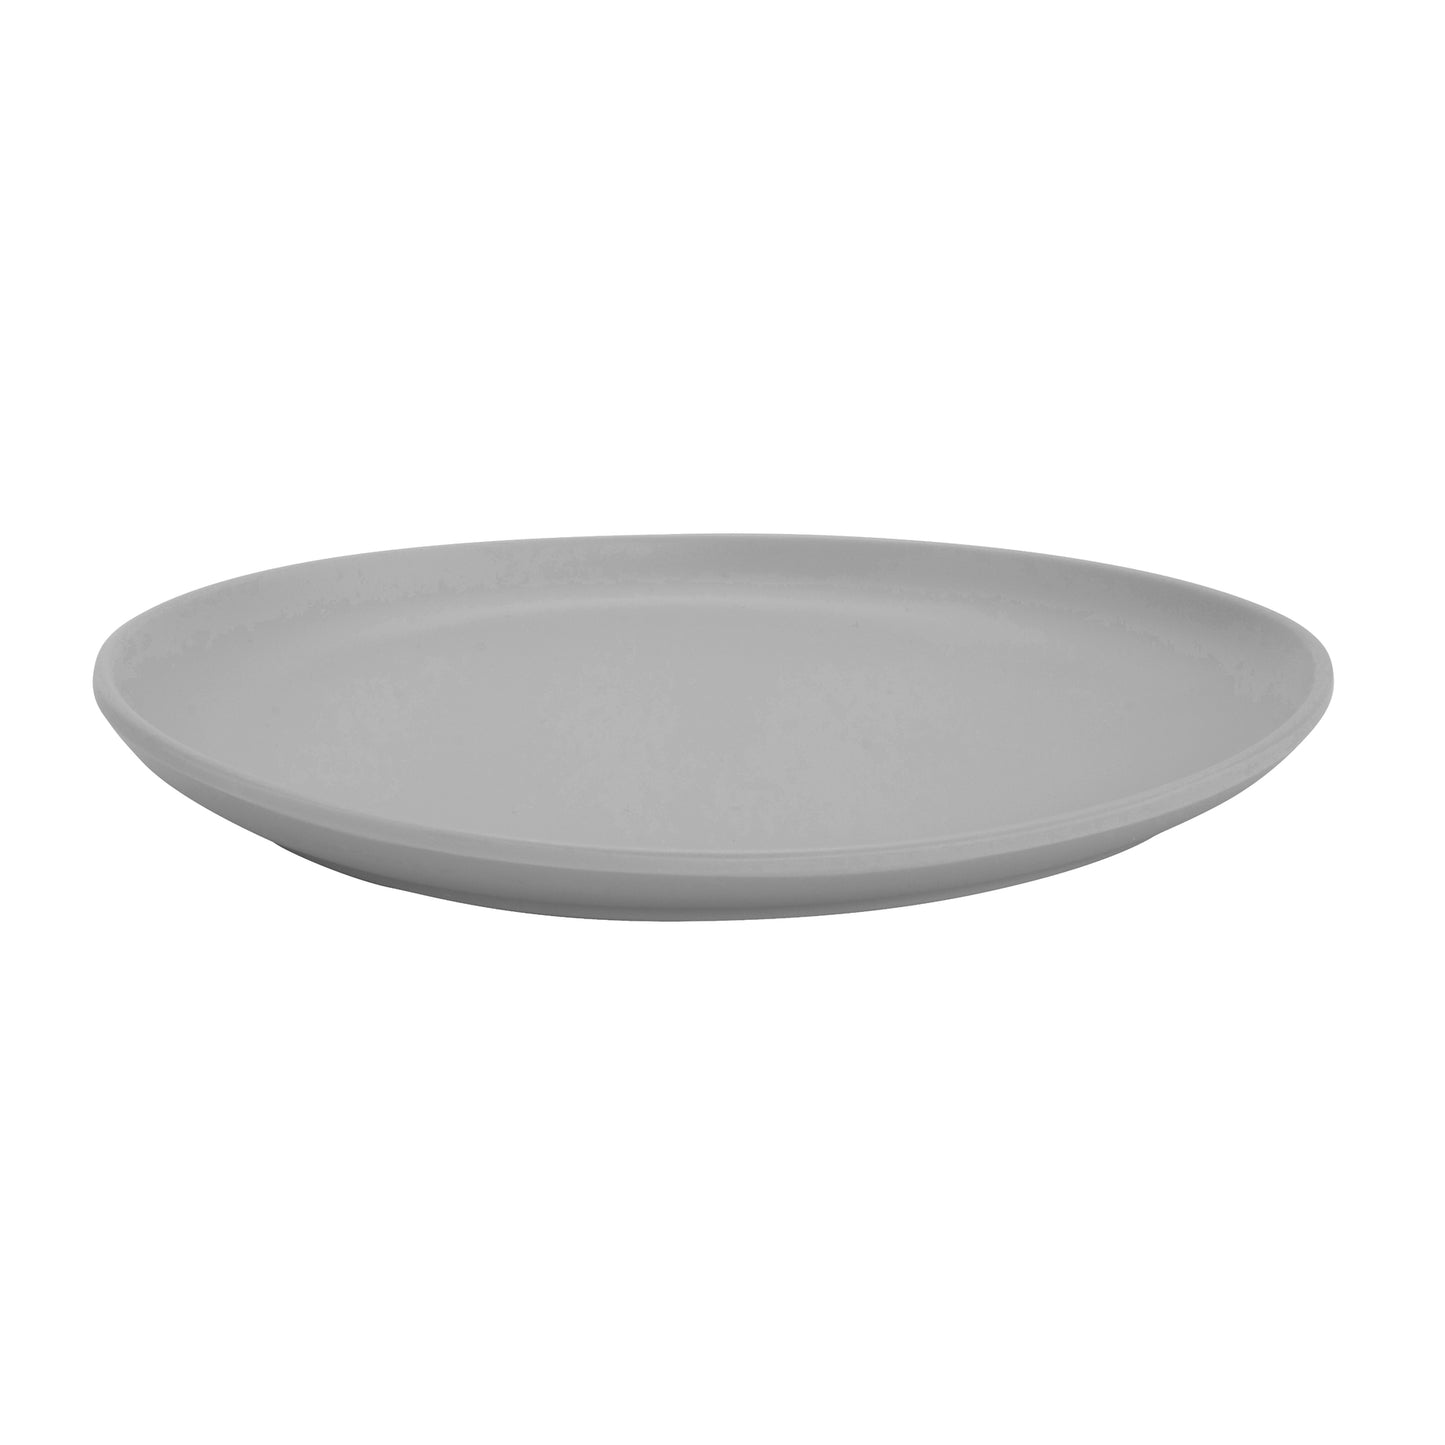 7" Light Gray, Melamine, Small Round Coupe  Bread Plate, G.E.T. Riverstone (12 Pack)